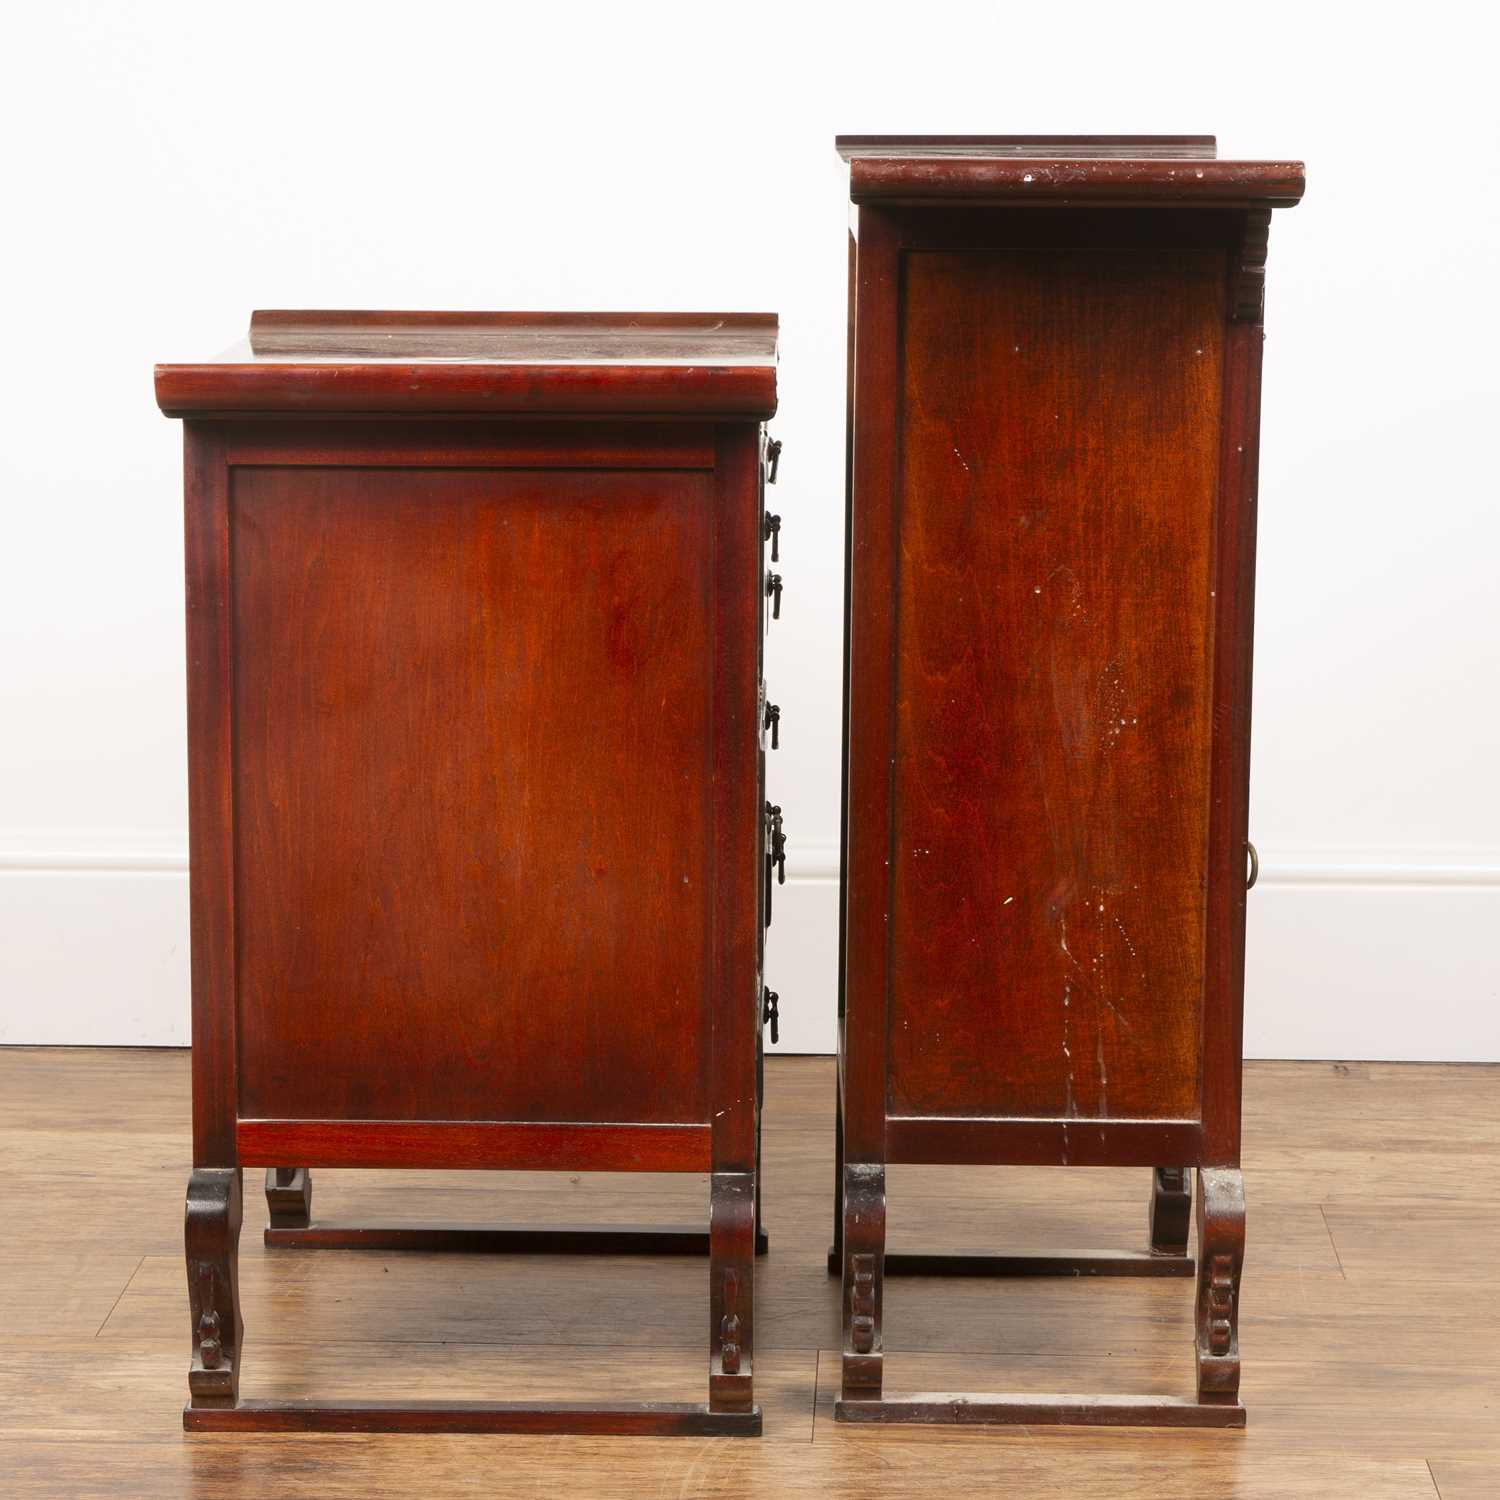 Two small sets of drawers Chinese, one 47cm wide x 75cm high x 25cm deep and the other 44.5cm wide x - Image 6 of 6